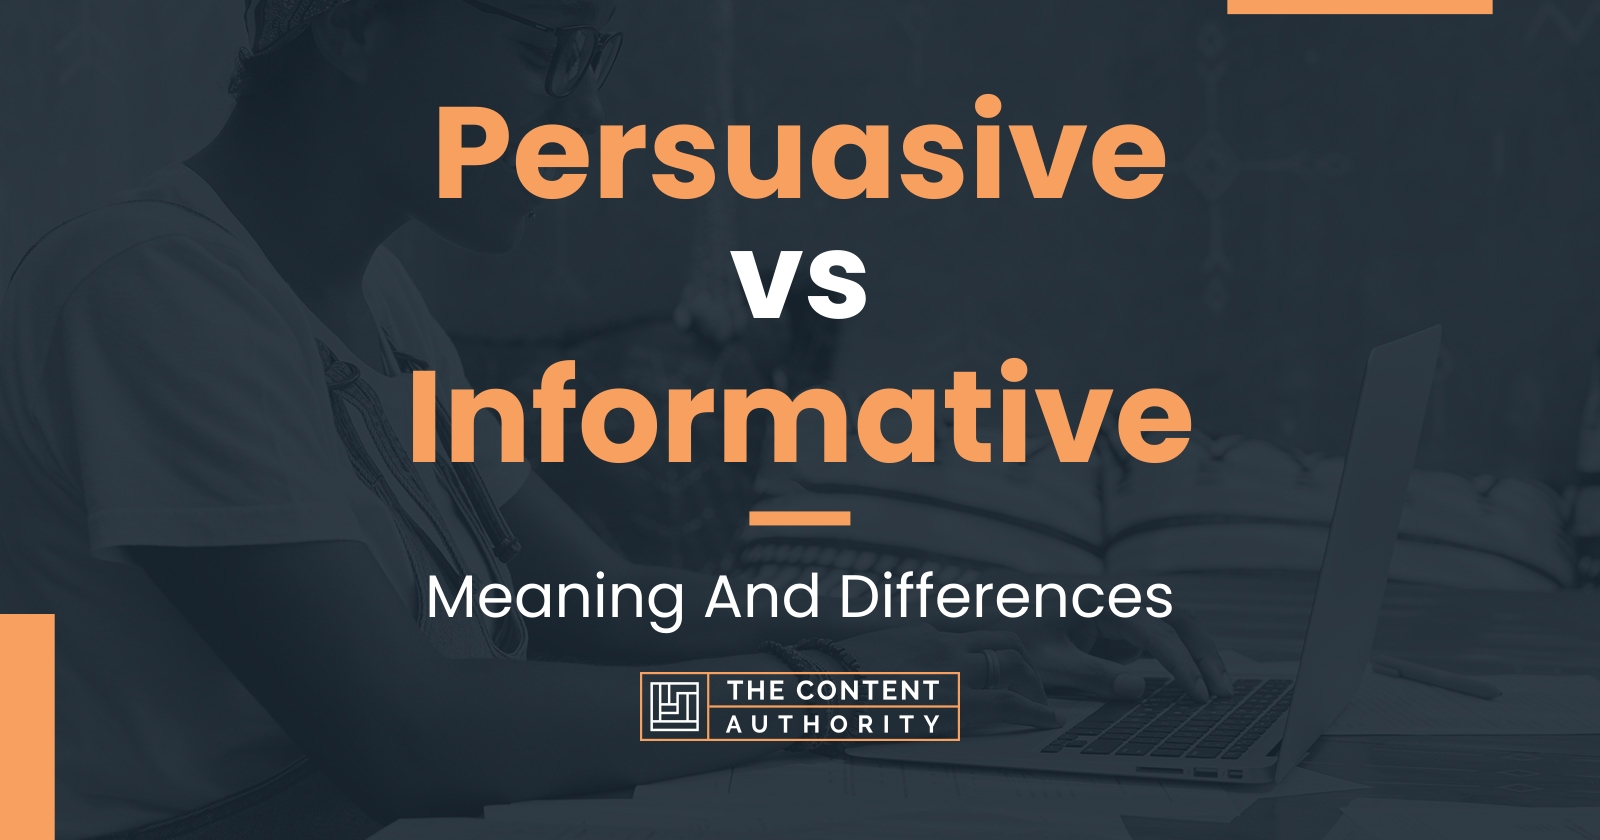 similarities and differences of informative and persuasive essay